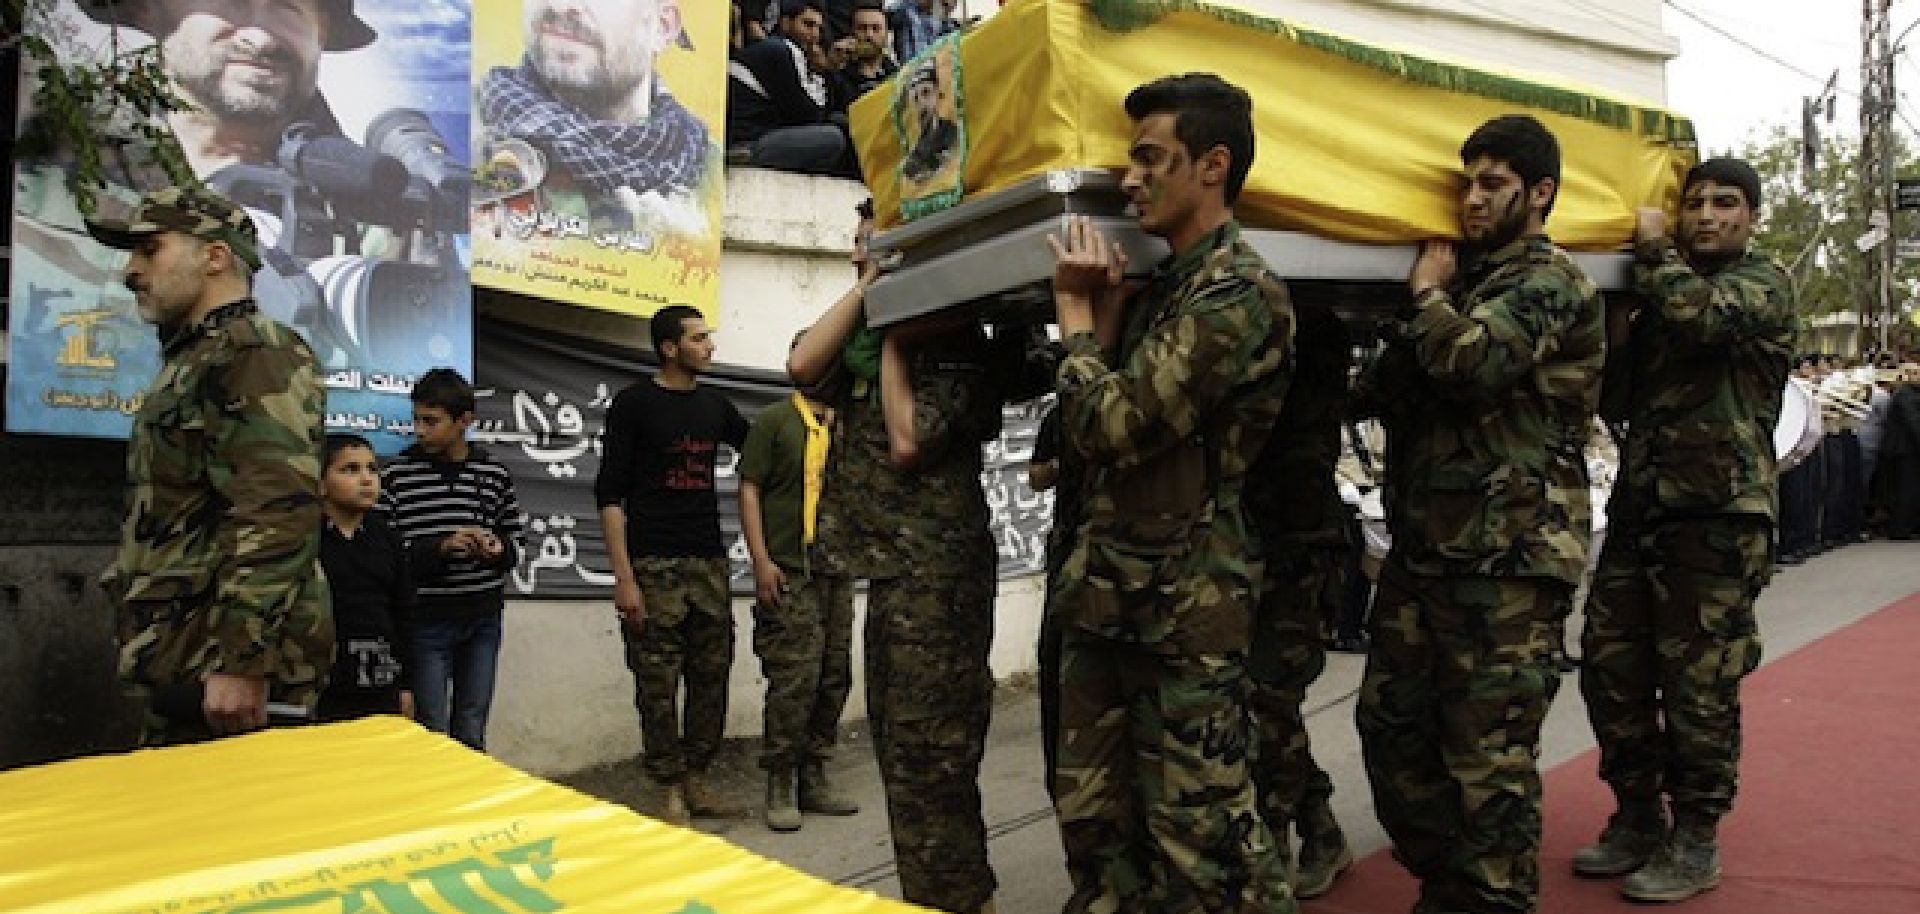 Tensions Grow Between Hezbollah and the Syrian Regime  Read more: Tensions Grow Between Hezbollah and the Syrian Regime